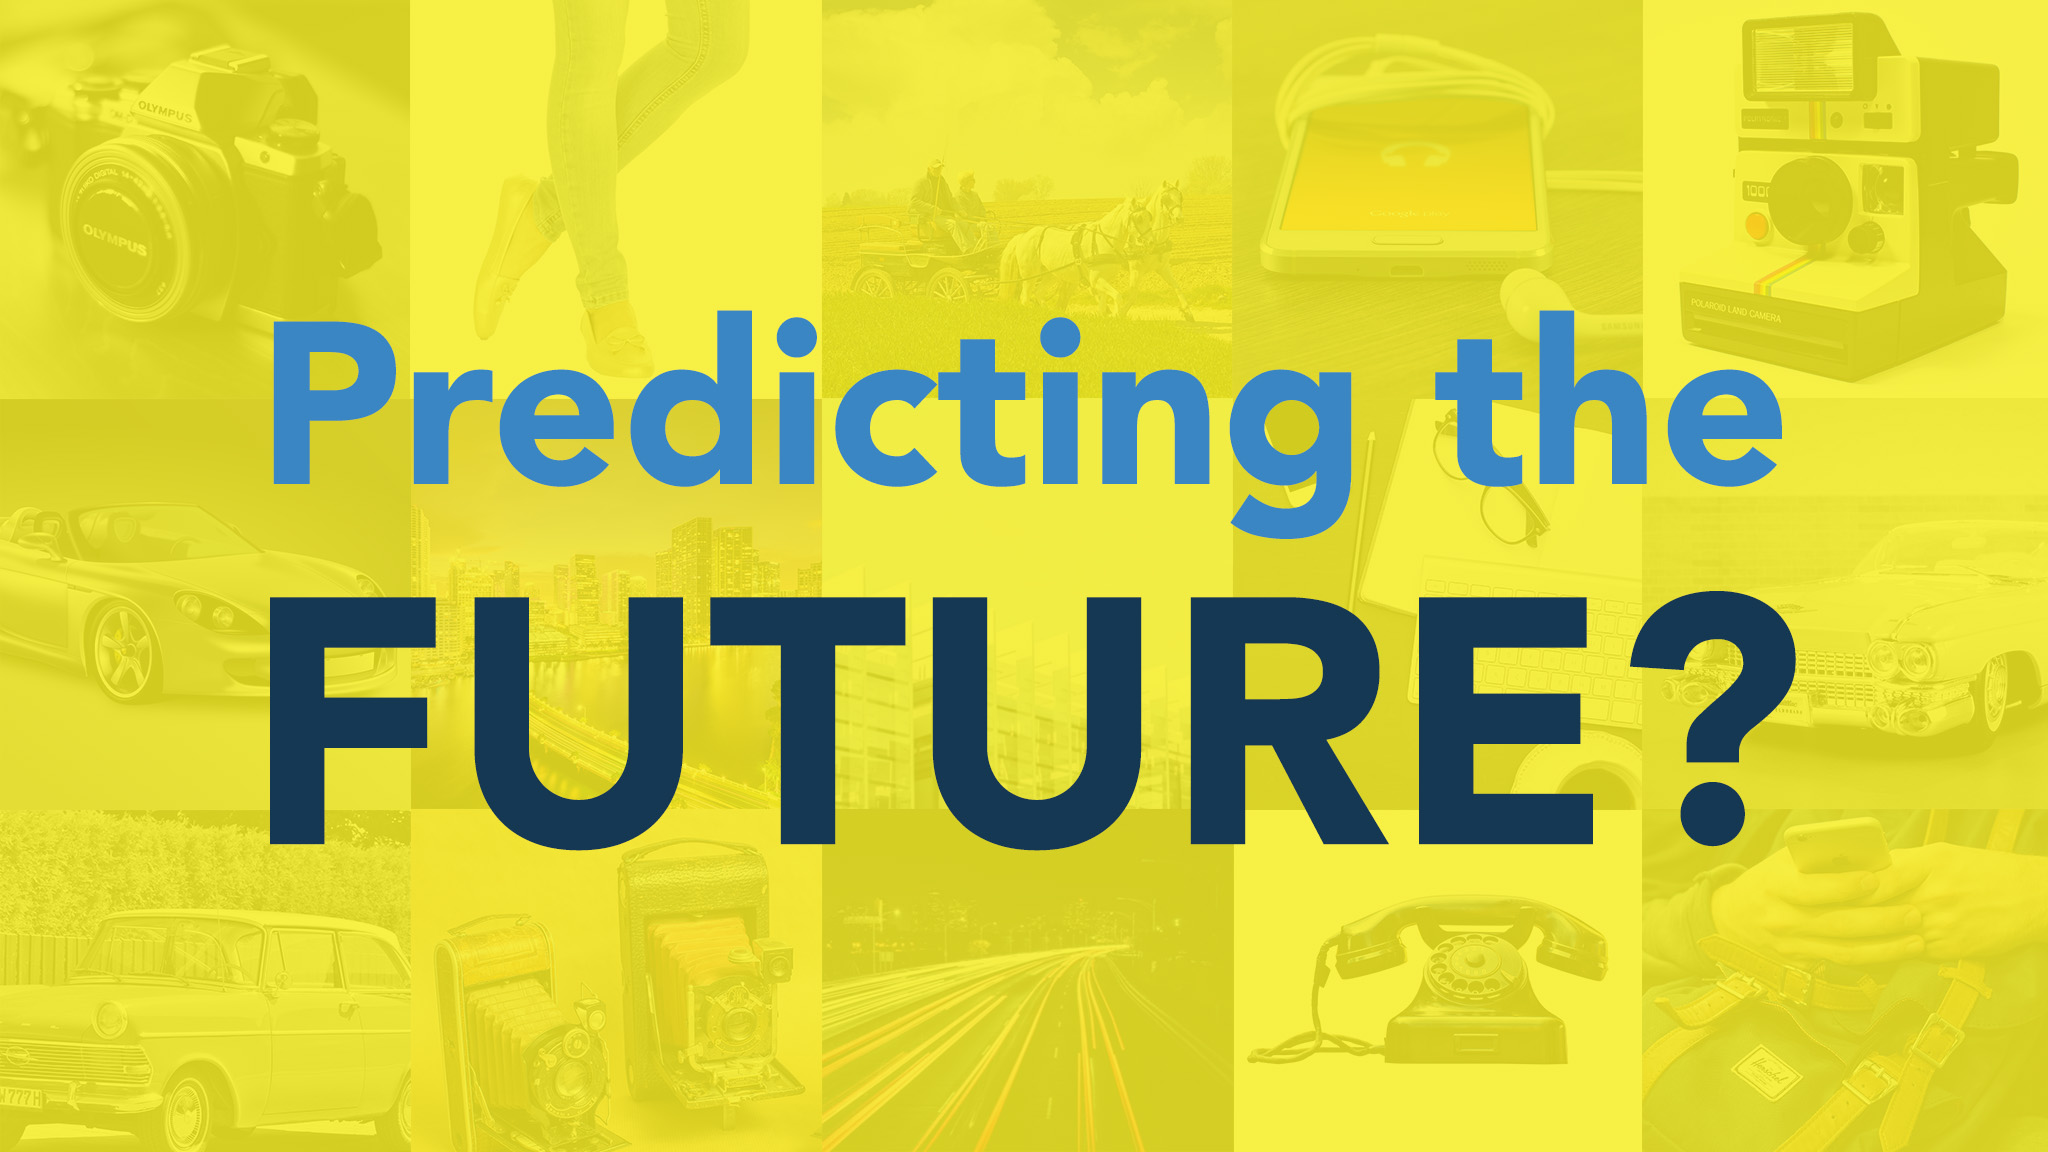 Predicting the Future cover - images of future predictions on yellow background